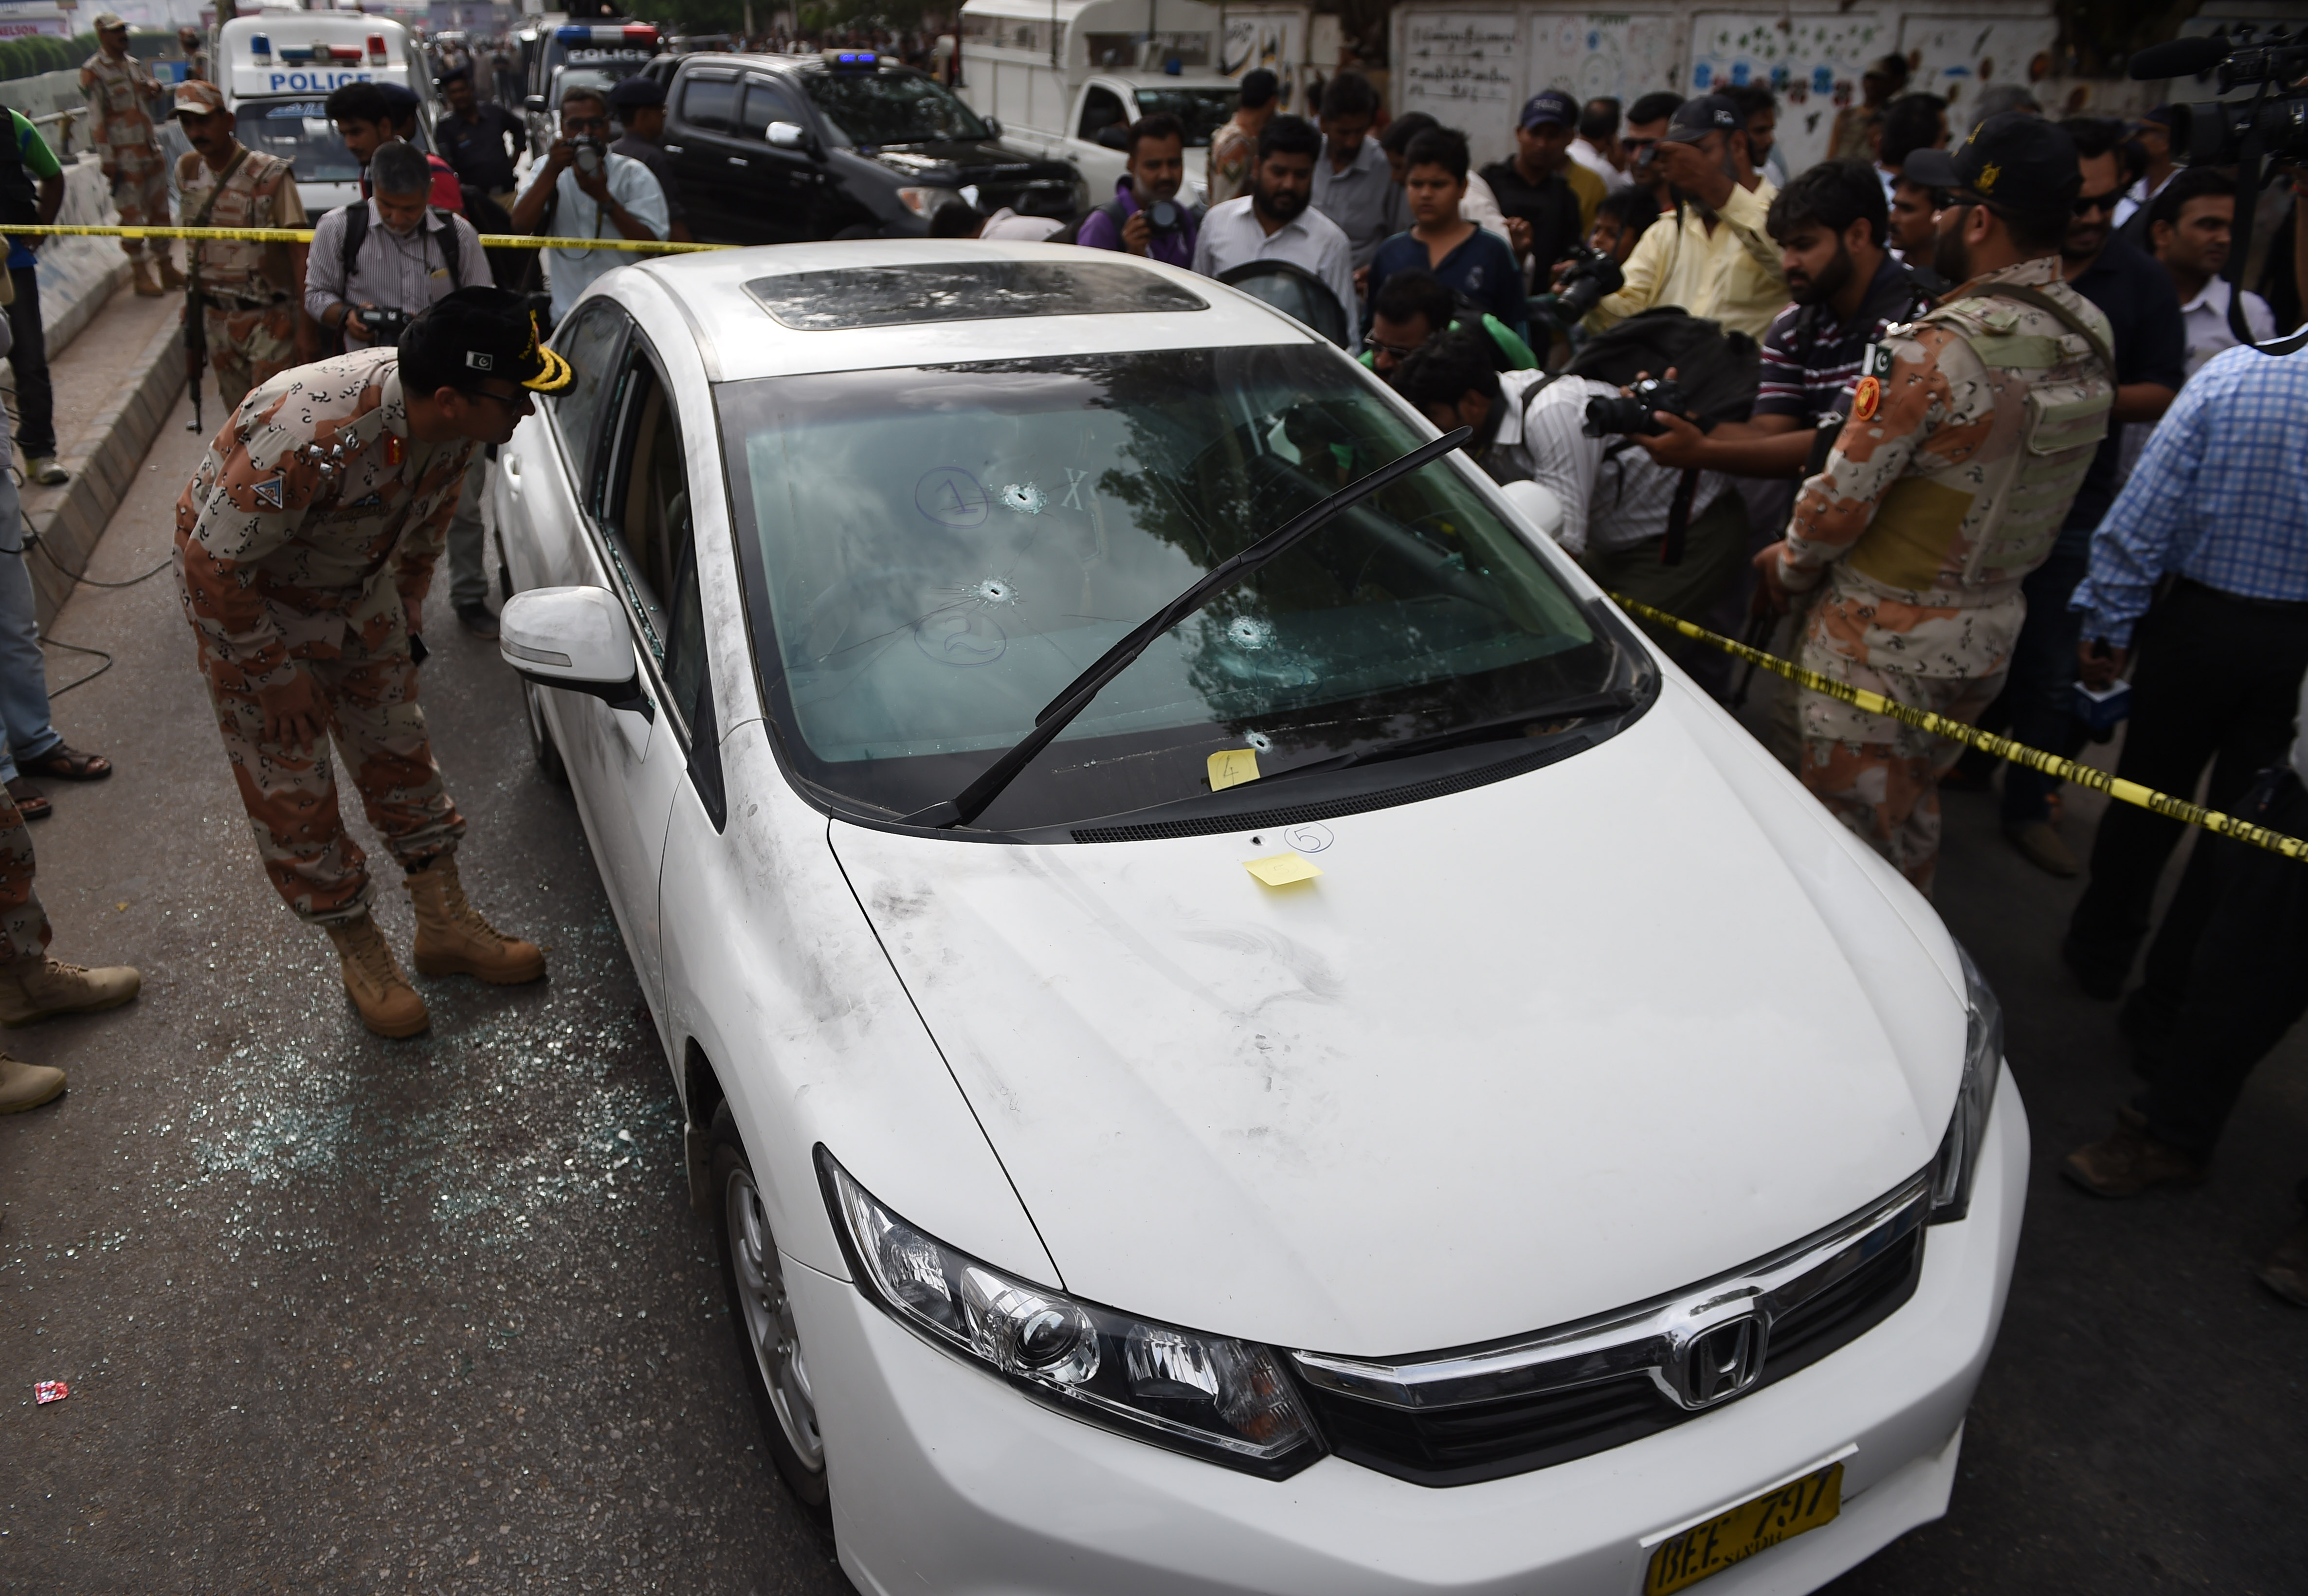 Pakistani security officials inspect the bullet-riddled car of Sufi musician Amjad Sabri who was killed in an attack by unknown gunmen, at a morgue in Karachi on June 22, 2016. (ASIF HASSAN—AFP/Getty Images)